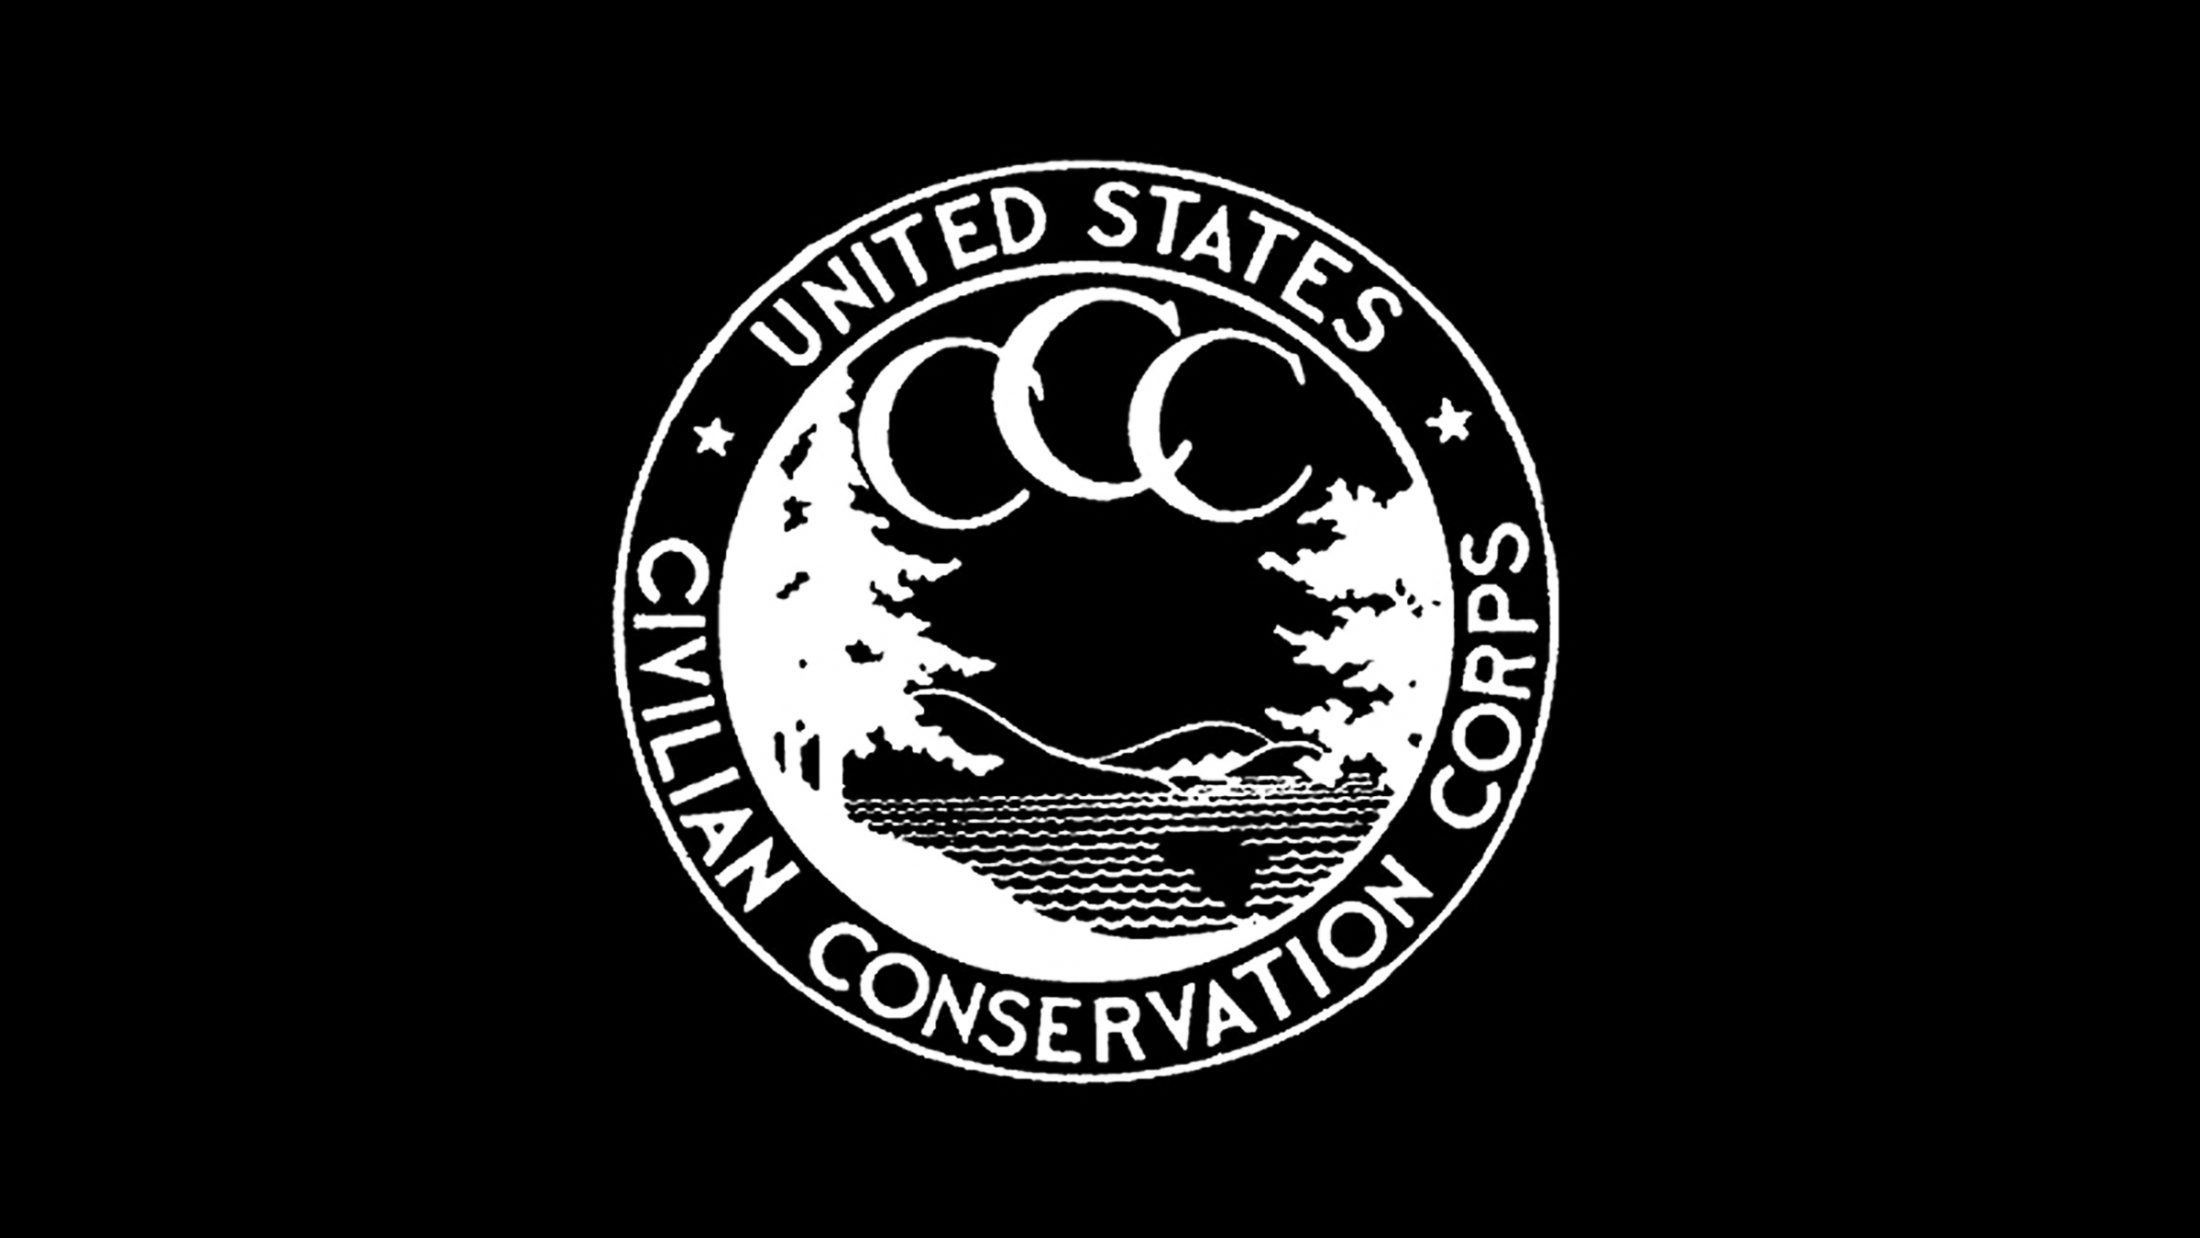 The US Civilian Conservation Corps seal was a monument to mysticism and lakefront camping.